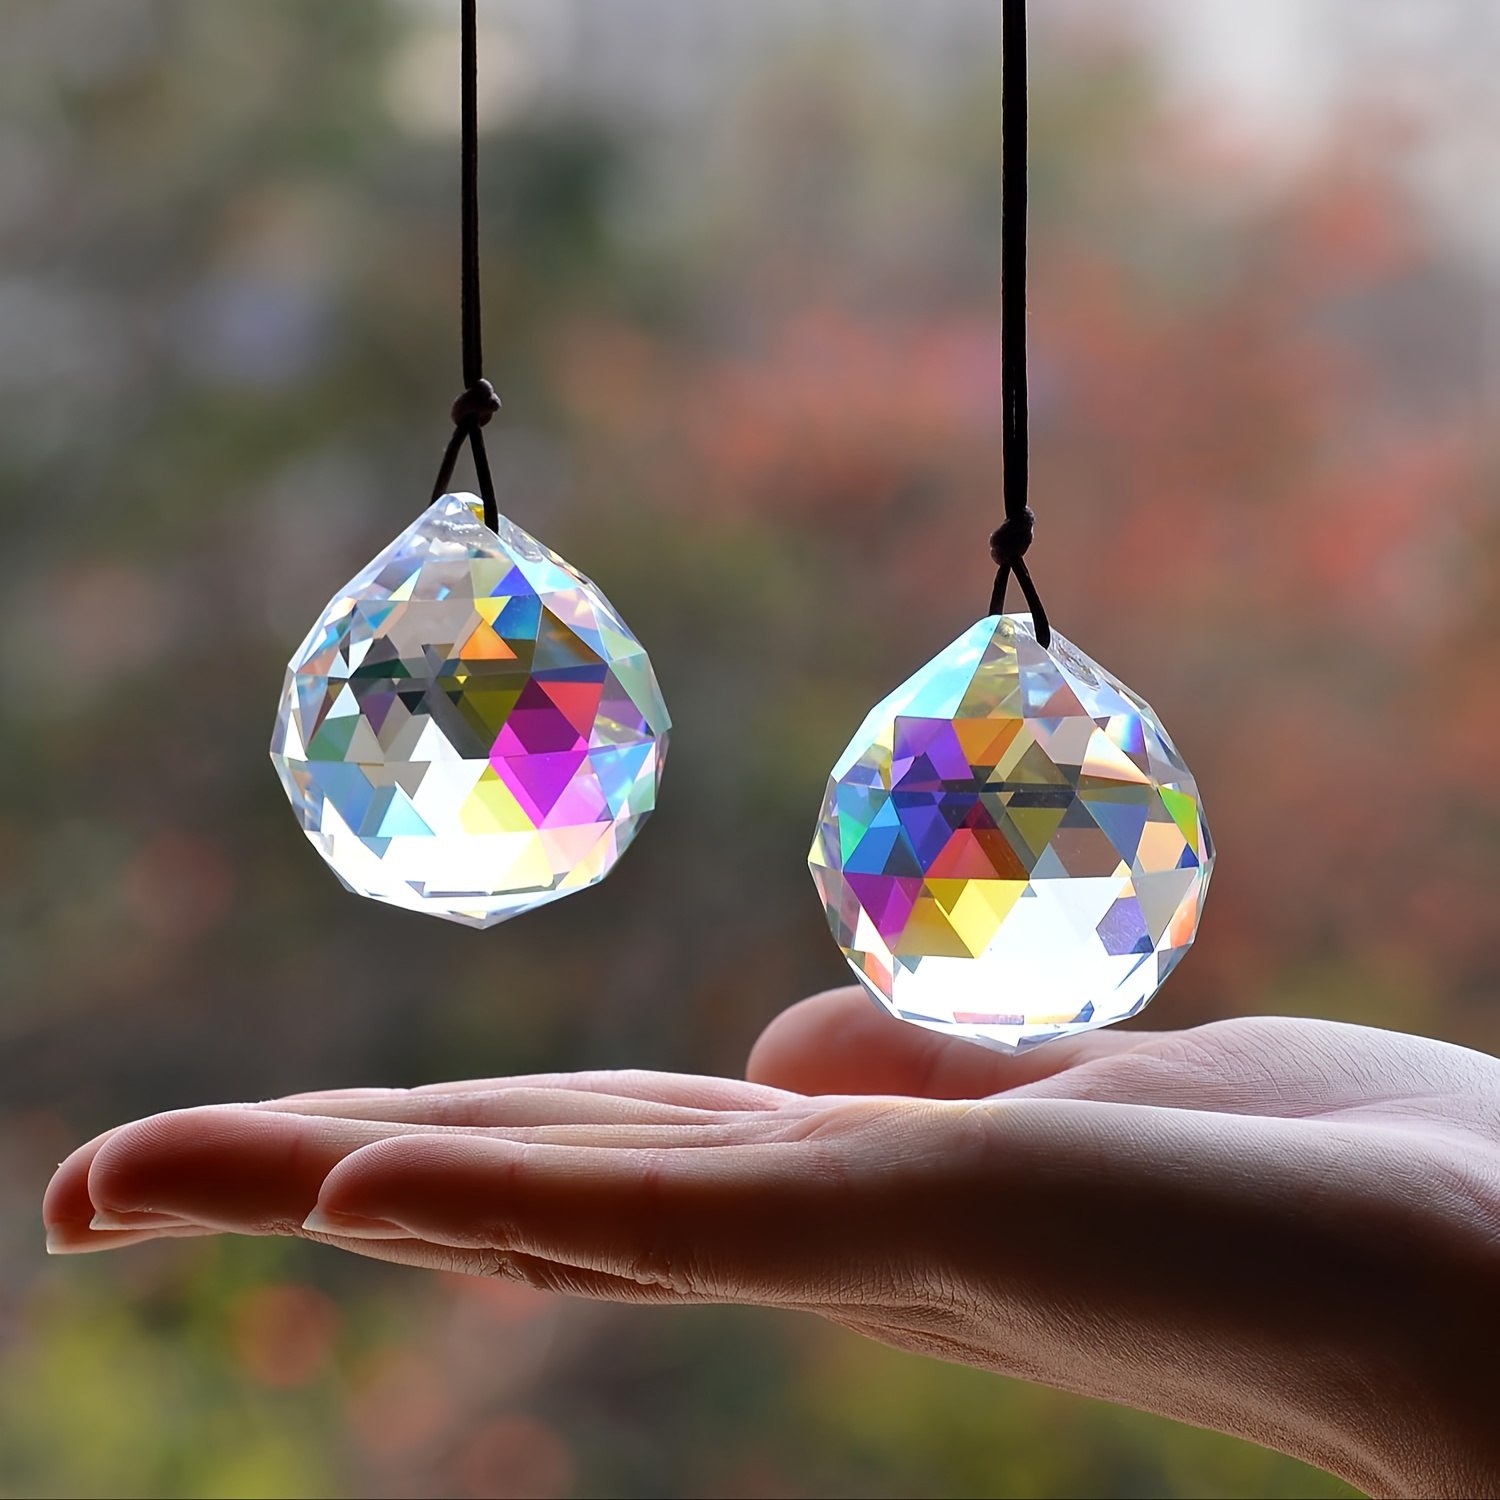 

2 Pack 40mm Glass Crystal Ball Pendant Suncatcher For Indoor Window Hanging - Enhance Your Home Decor With Eye-catching Rainbow Reflections